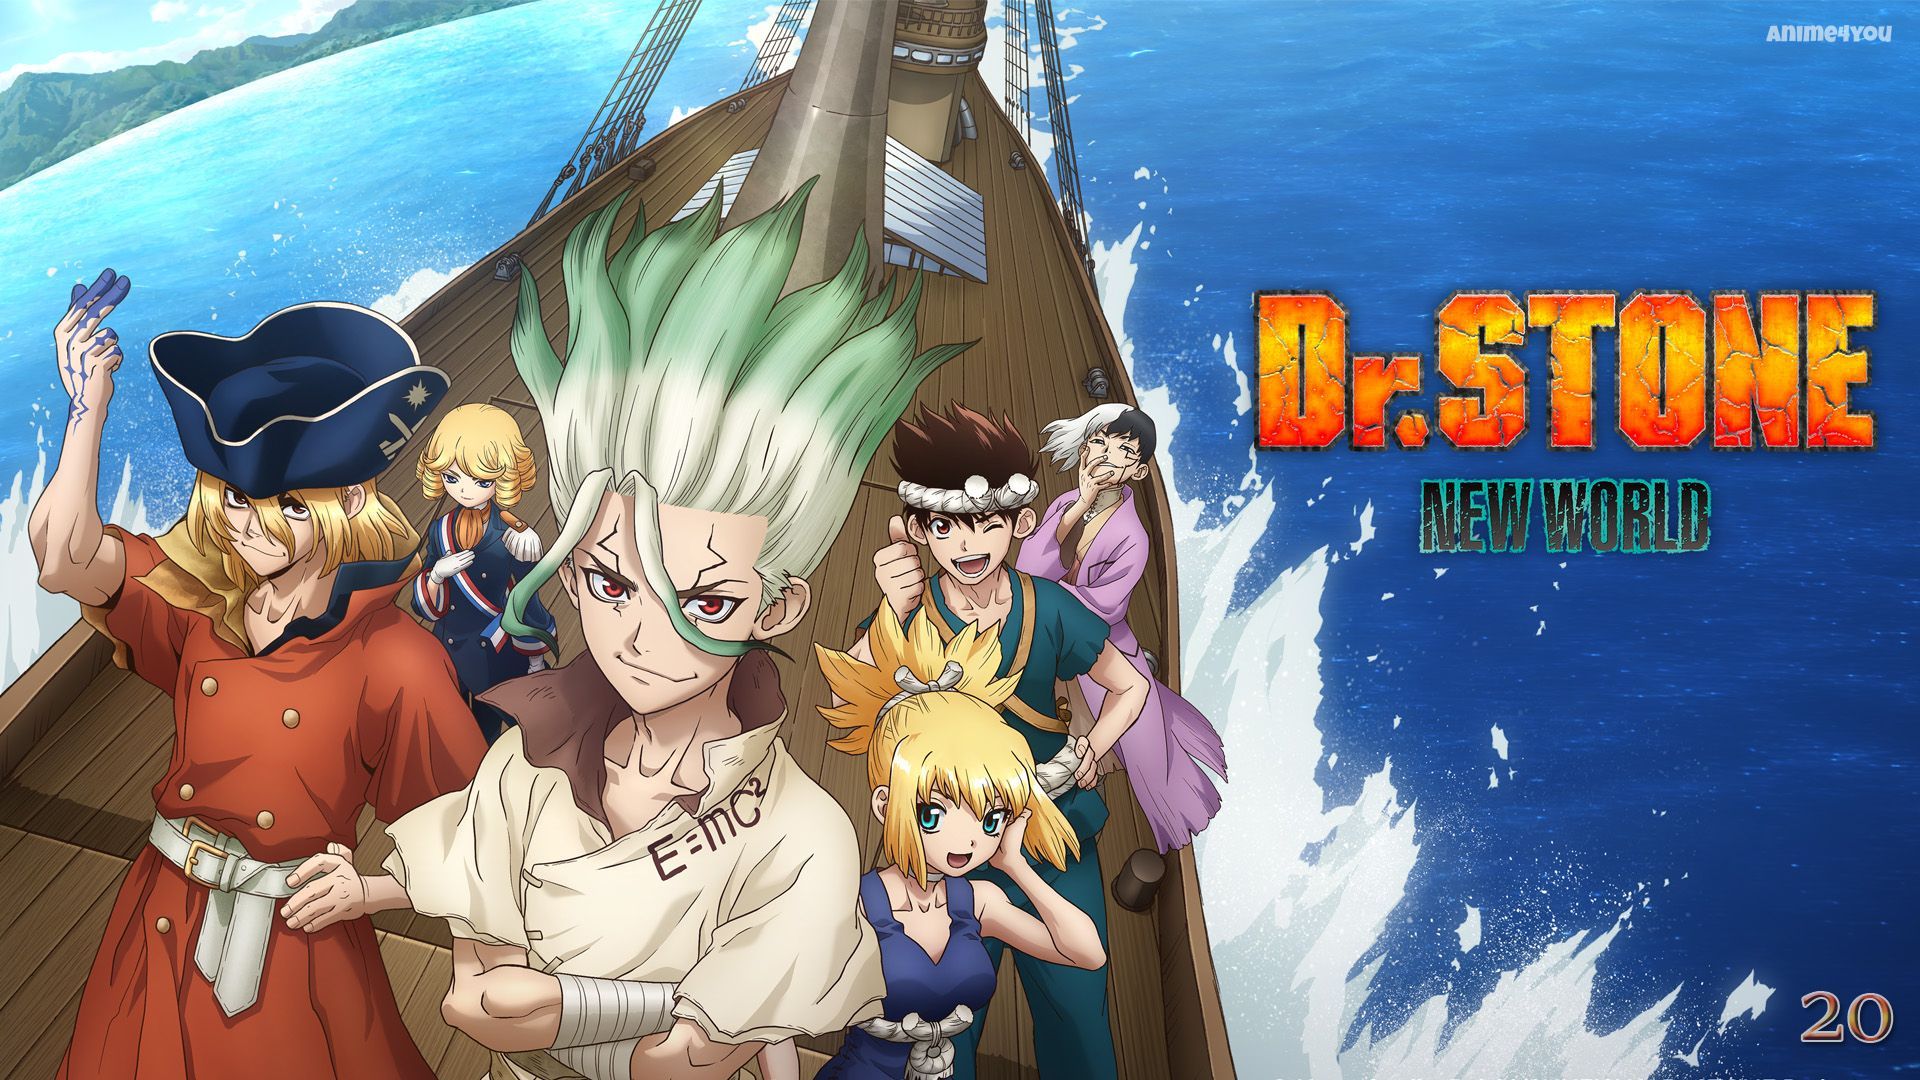 Dr. Stone: New World Episode 20 Reveals Preview Trailer - Anime Corner